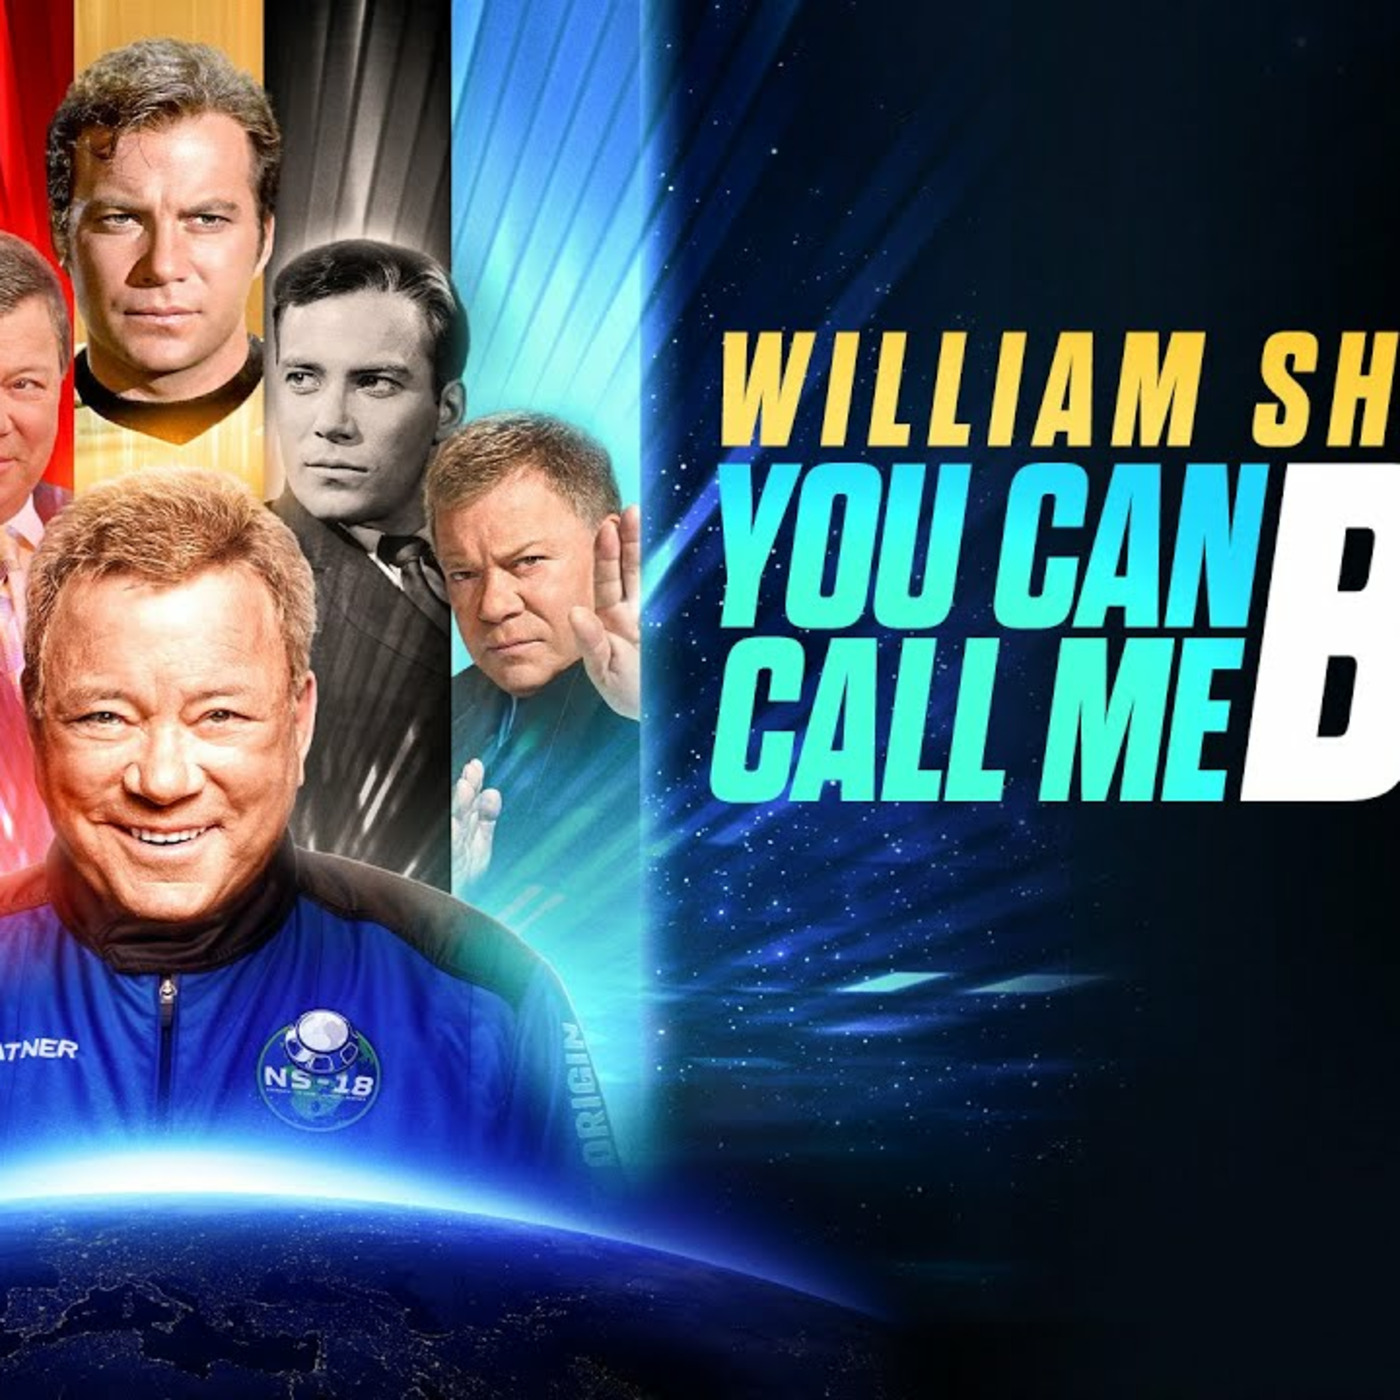 Episode 92: 1on1 with Alexandre Philippe (WILLIAM SHATNER: YOU CAN CALL ME BILL)